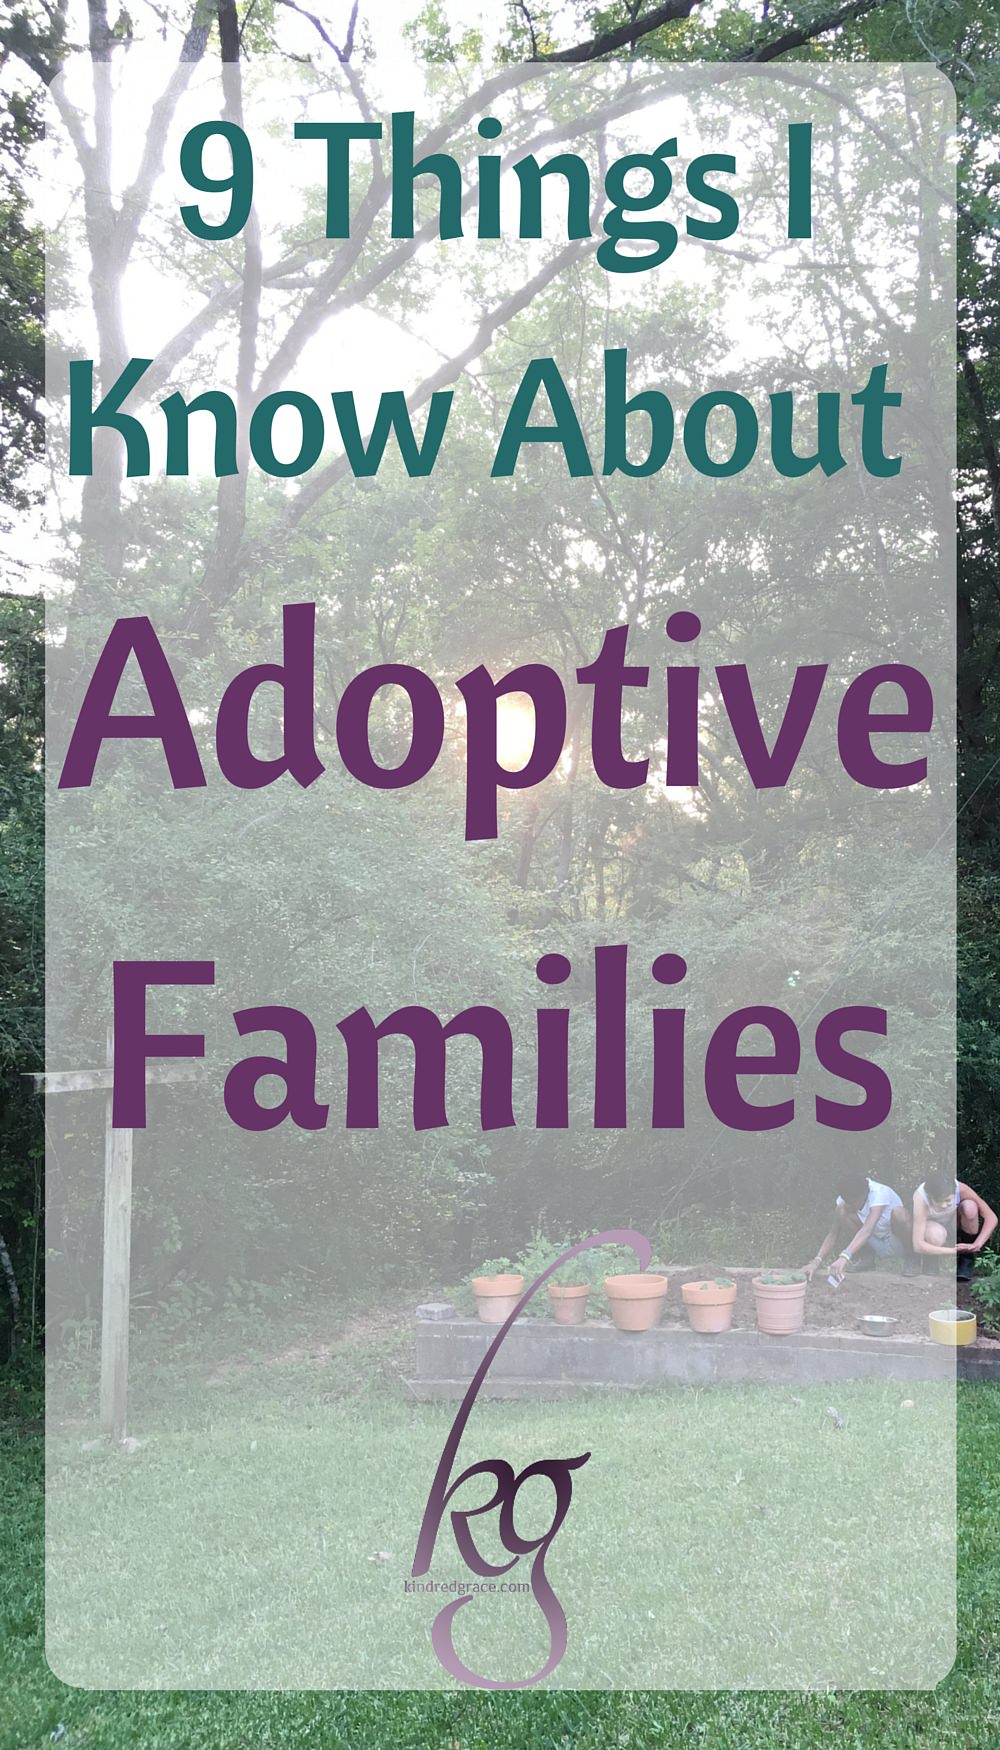 Adoptive families often have invisible special needs. God has given you a "special ops" job as a parent. You have a very difficult mission, if you choose to accept. But don’t worry, you have a legion of brothers and sisters who won’t leave you behind. via @KindredGrace